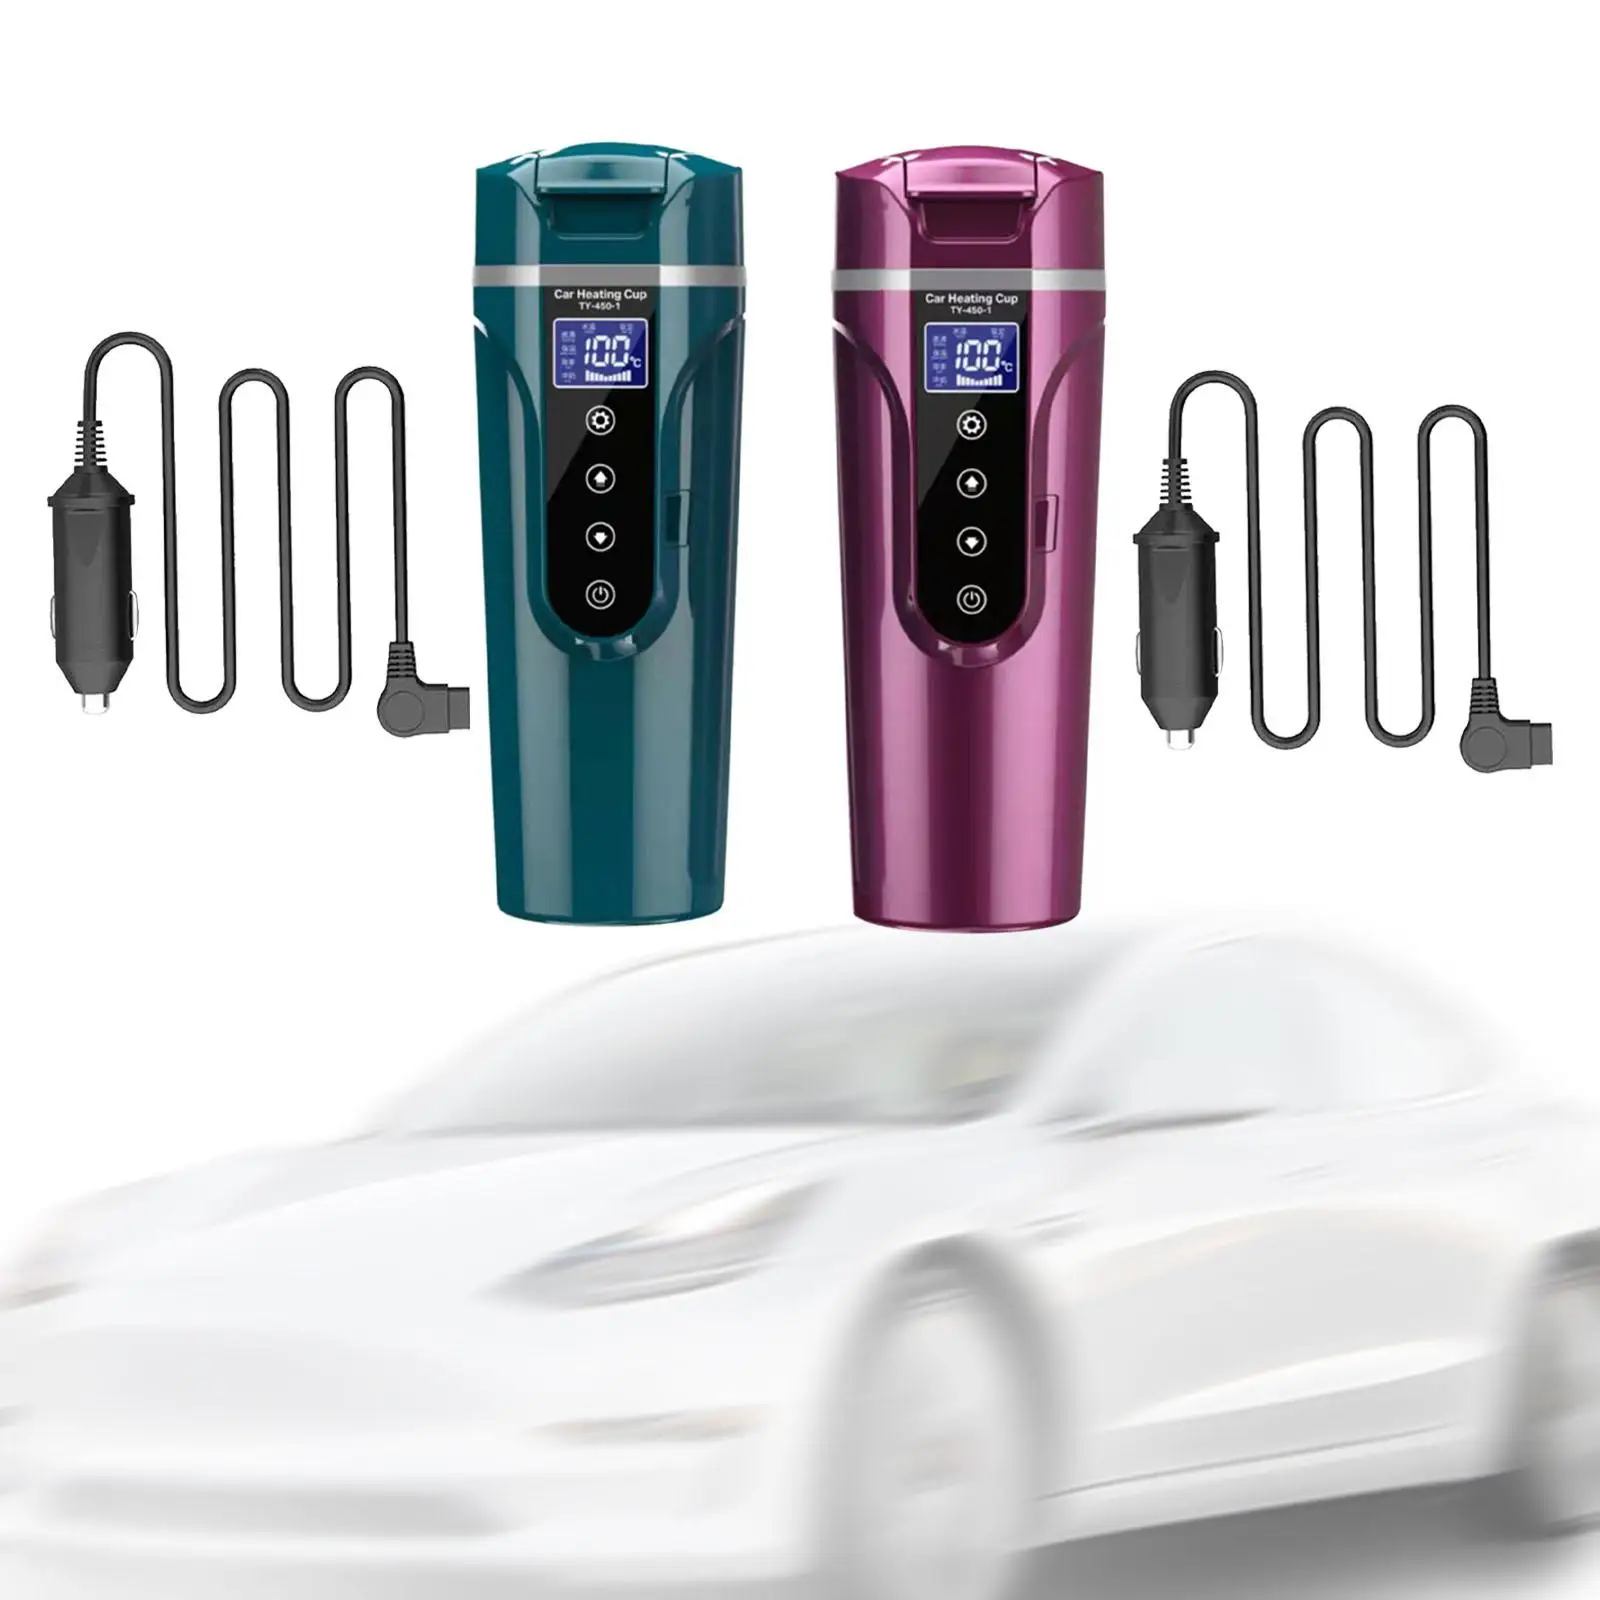 Car Heating Cup Fast Boiling Leakproof 12V/24V Travel Car Truck Kettle Car Travel Kettle for Tea Coffee Milk Water Travel